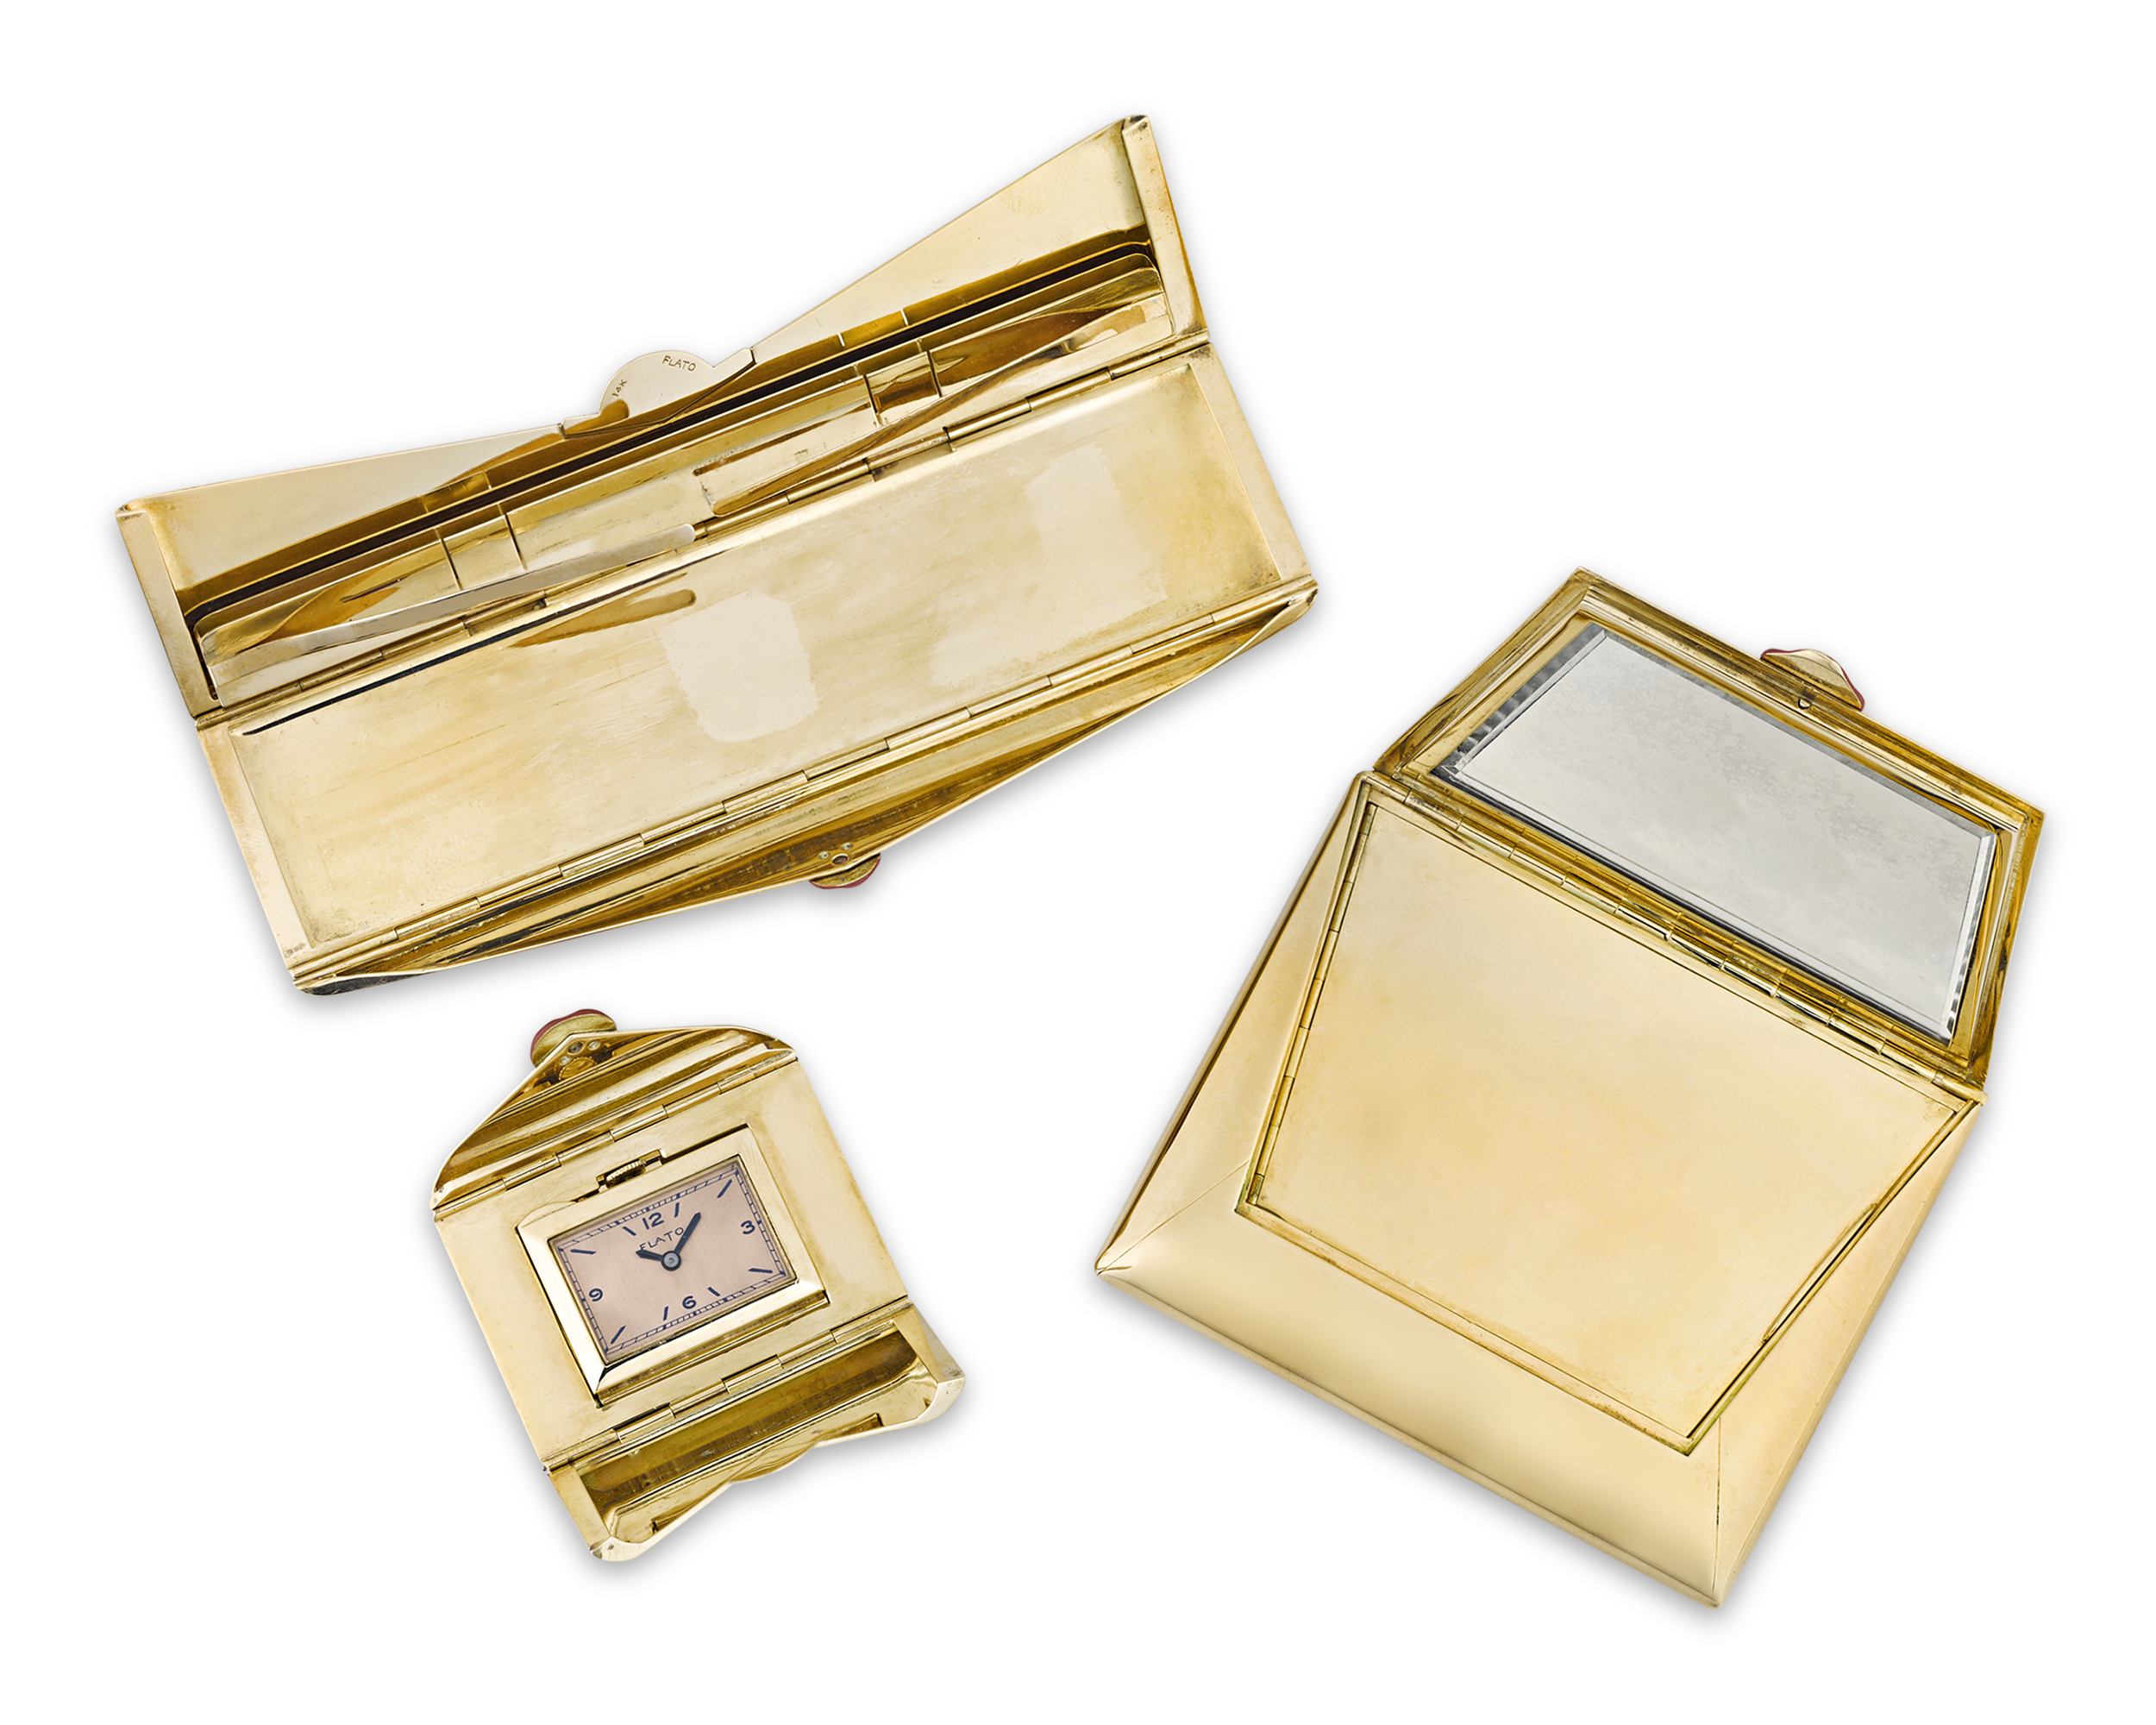 Paul Flato Gold and Enamel Compacts